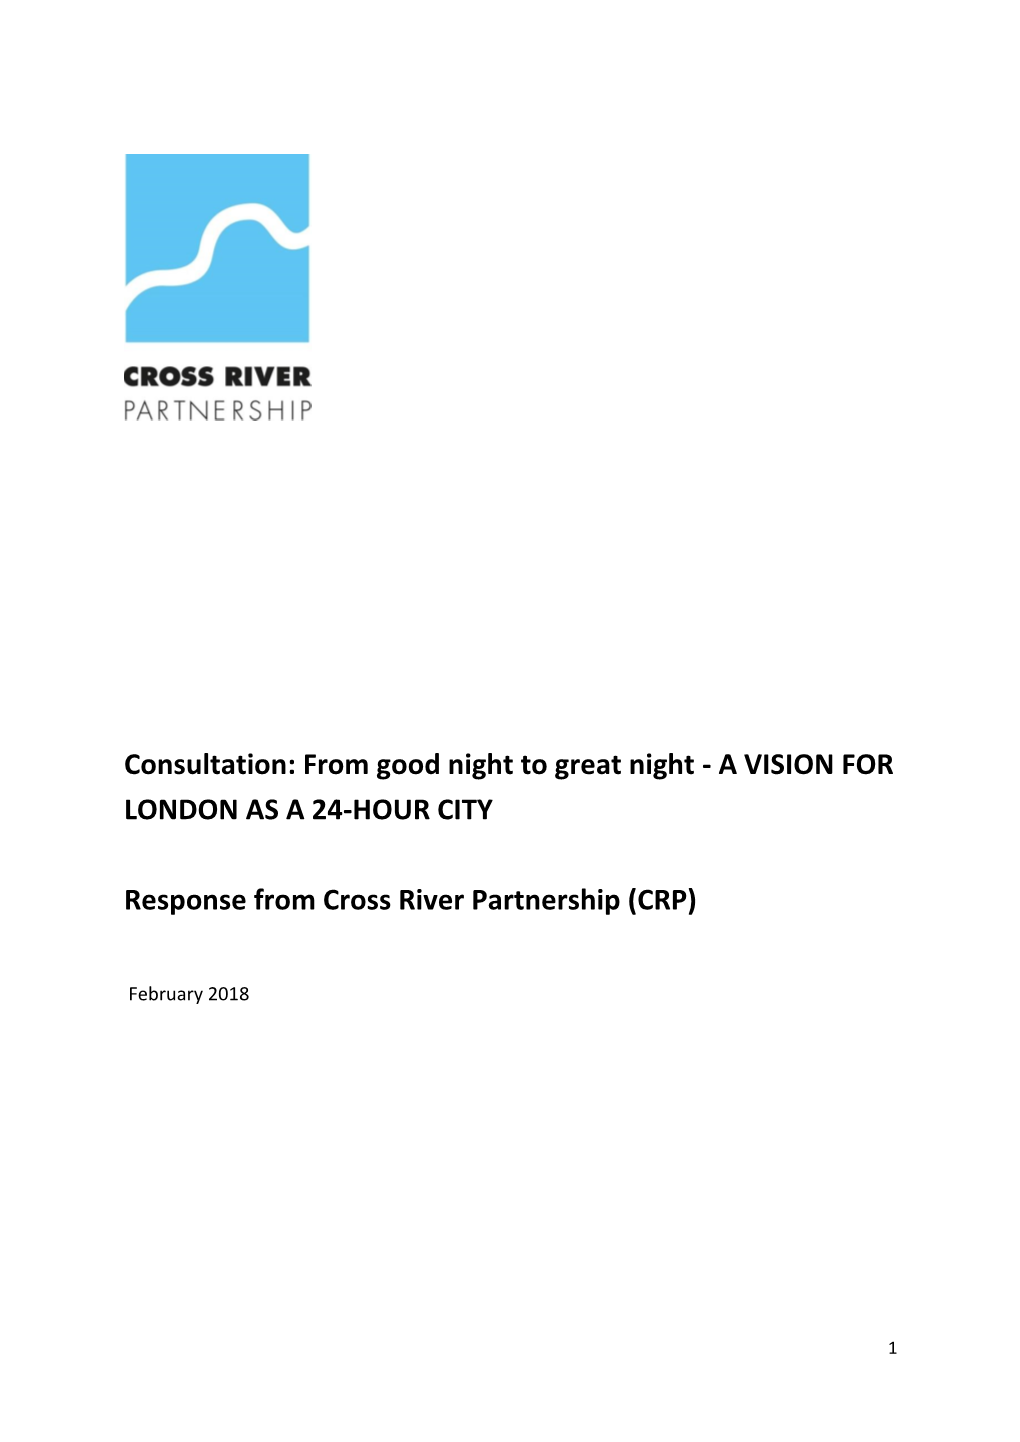 Consultation: from Good Night to Great Night - a VISION for LONDON AS a 24-HOUR CITY